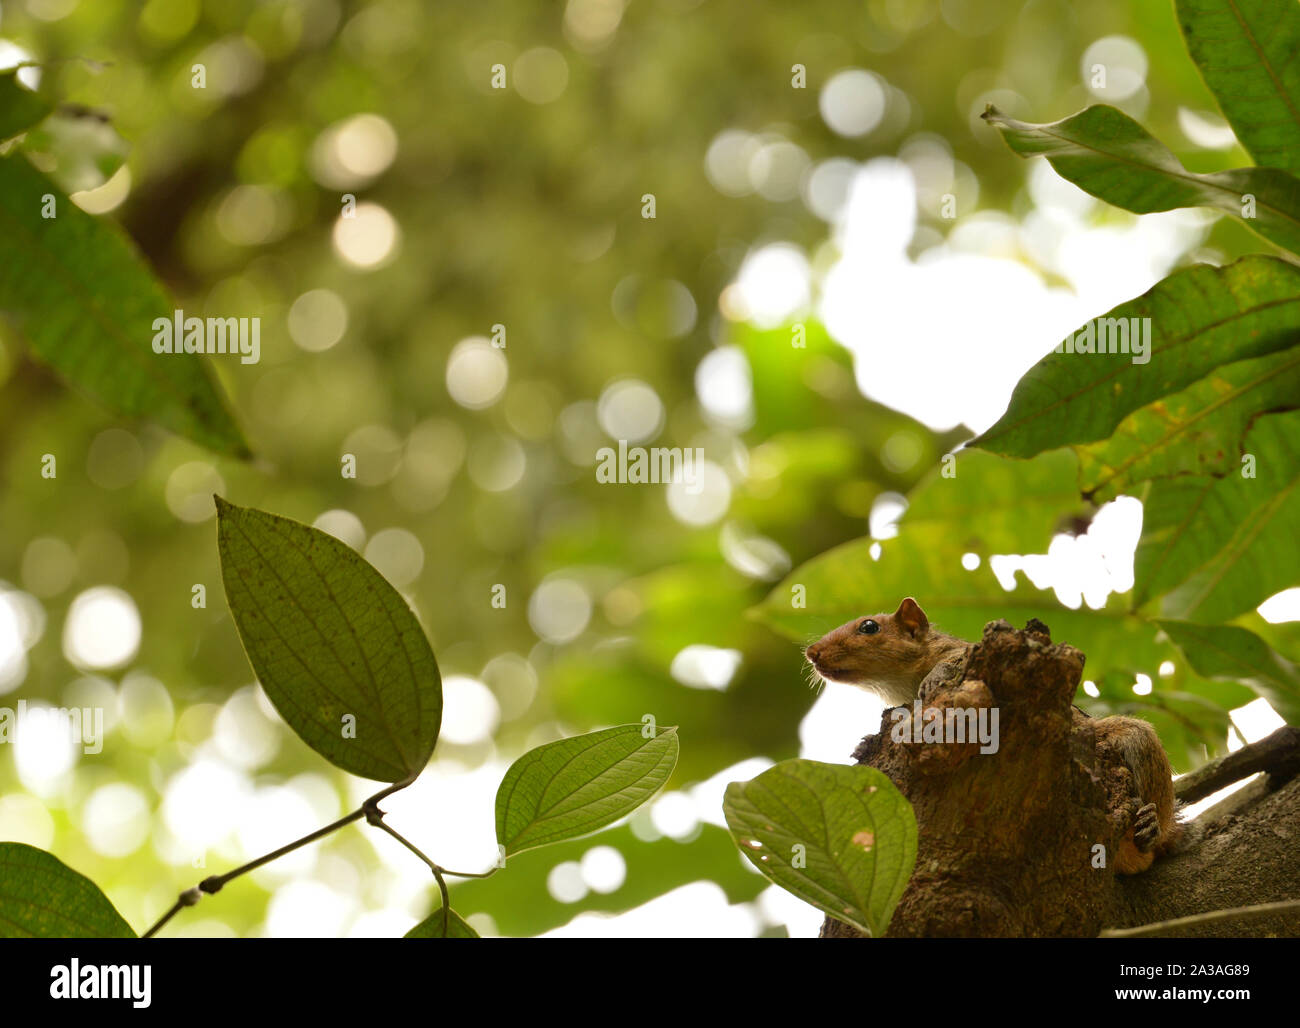 A cute squirrel watching on top of the tree Stock Photo